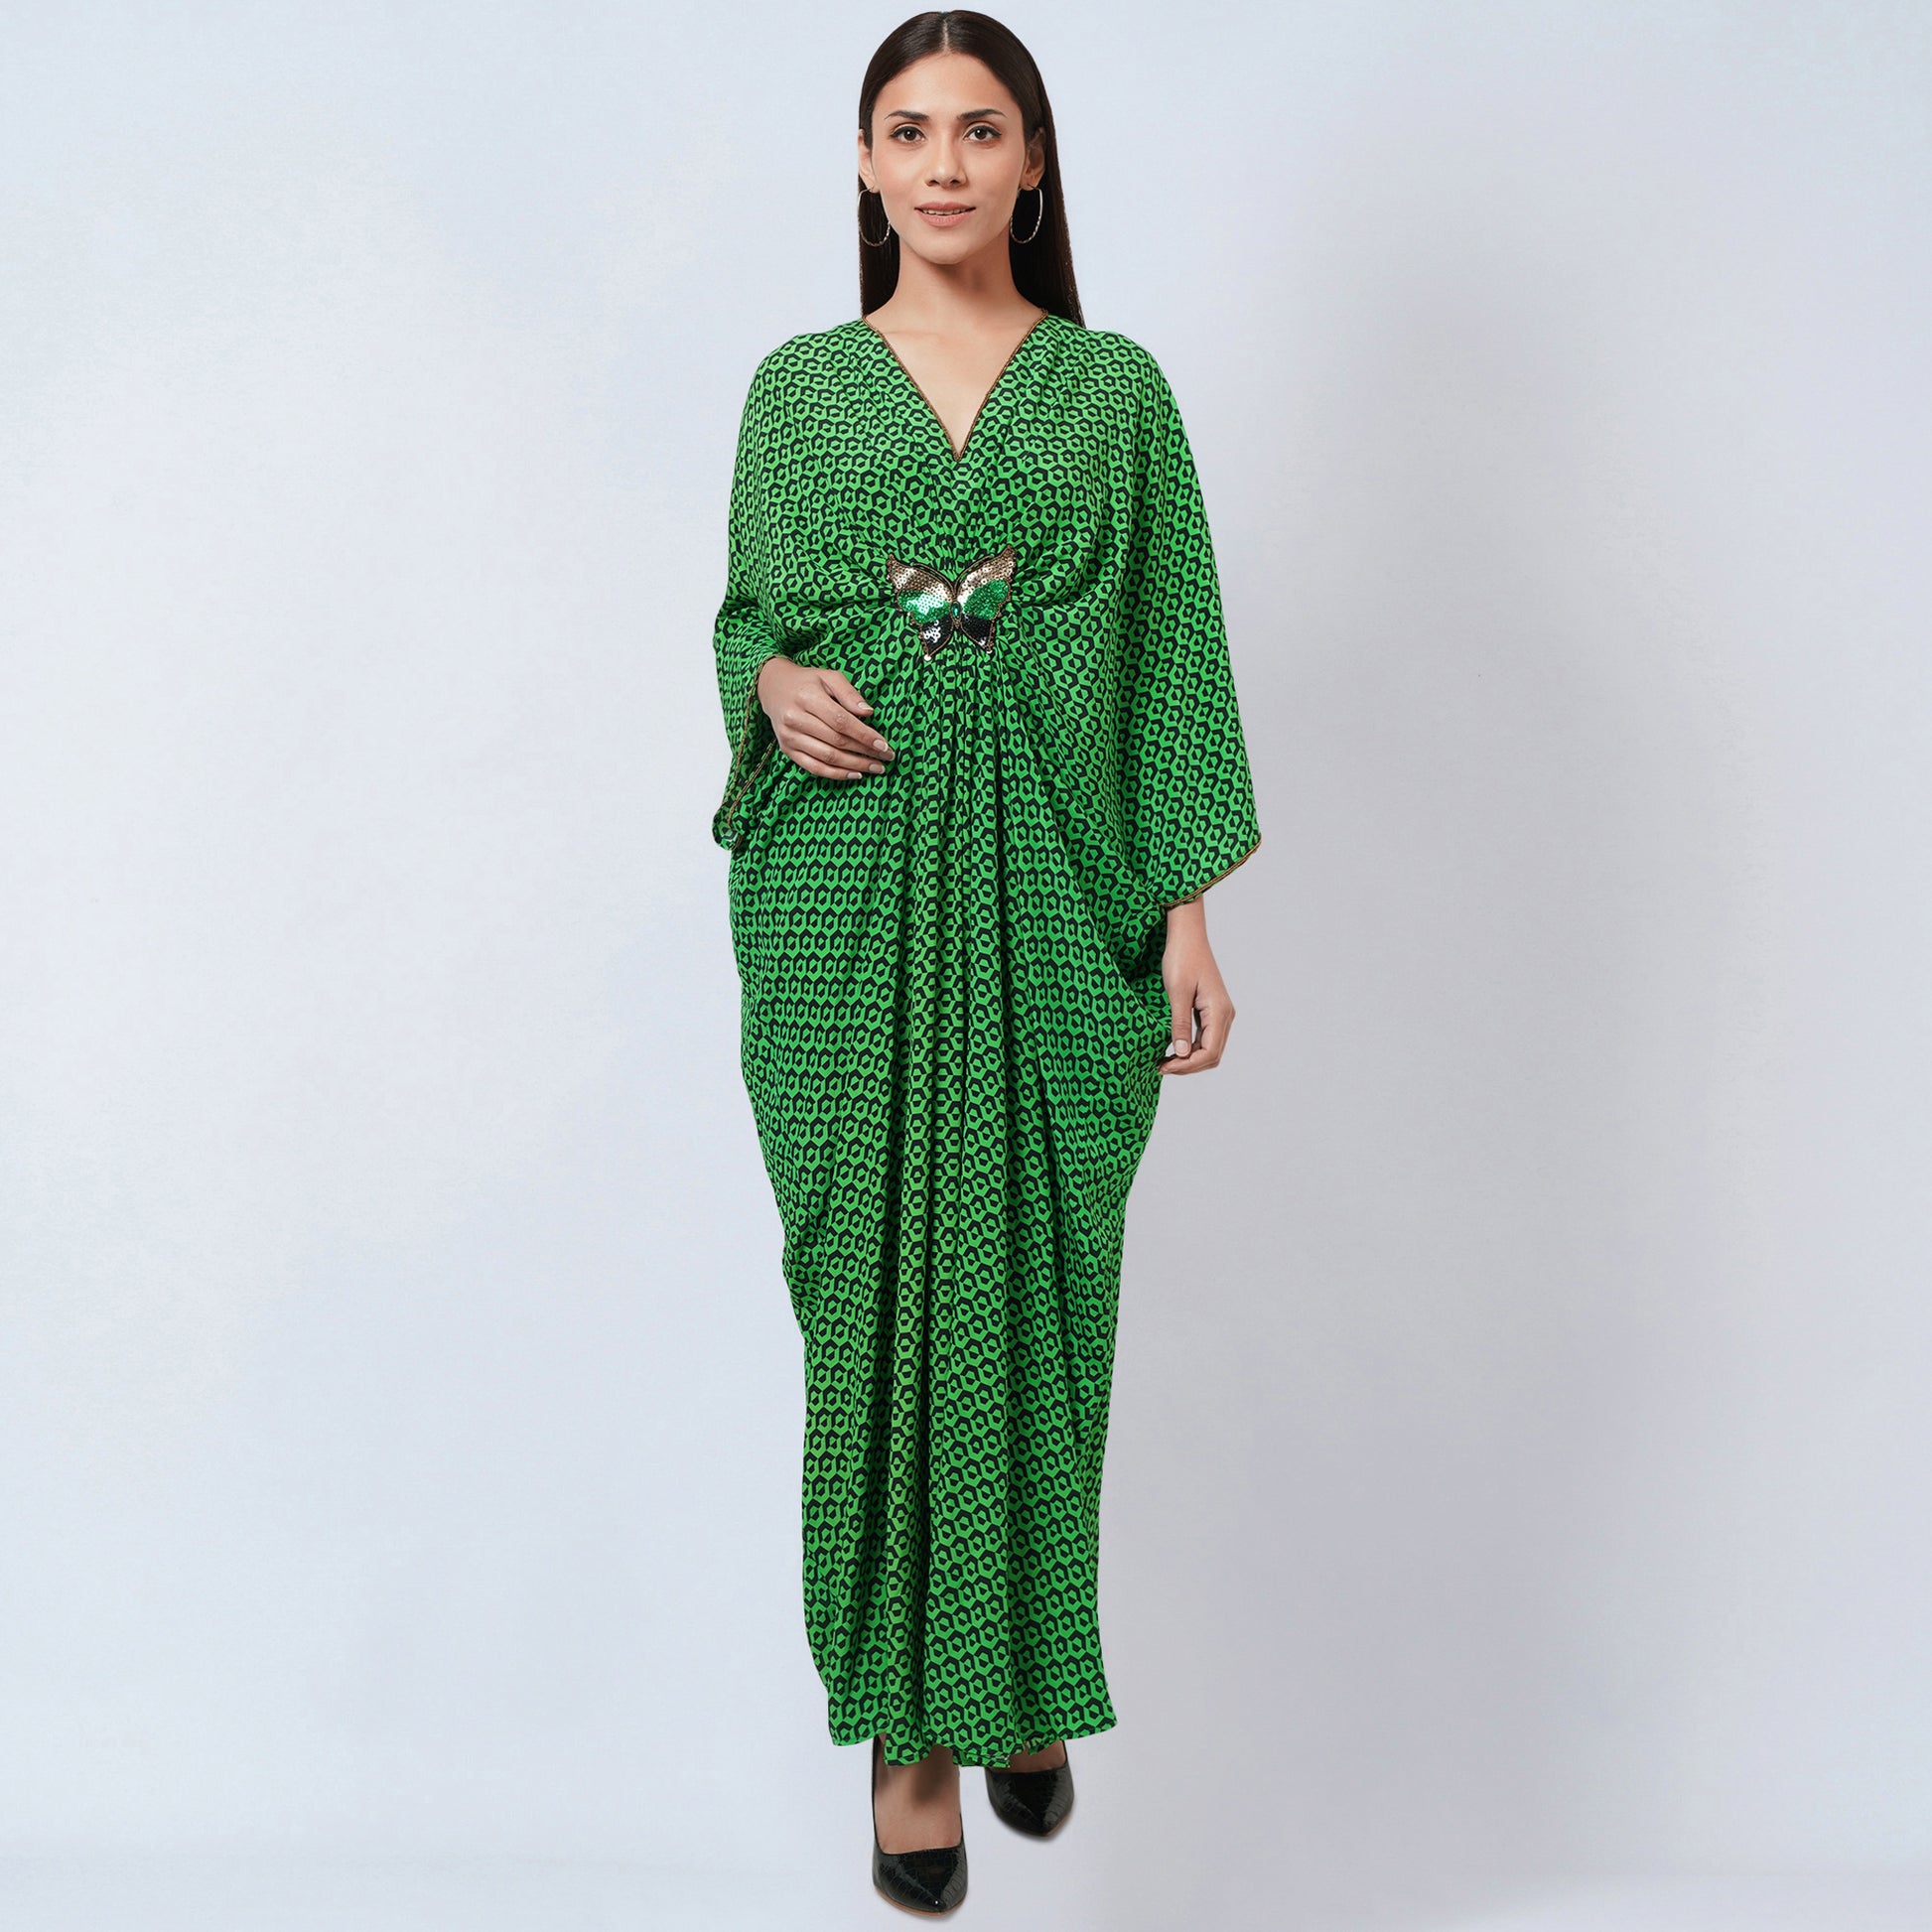 Image of Indulge in luxury with this full-length kaftan made from 100% silk fabric. Featuring a fluorescent green honeycomb print with embroidered butterfly motif, your wardrobe will be enhanced with an elegant, yet stylish element.  From savoirfashions.com